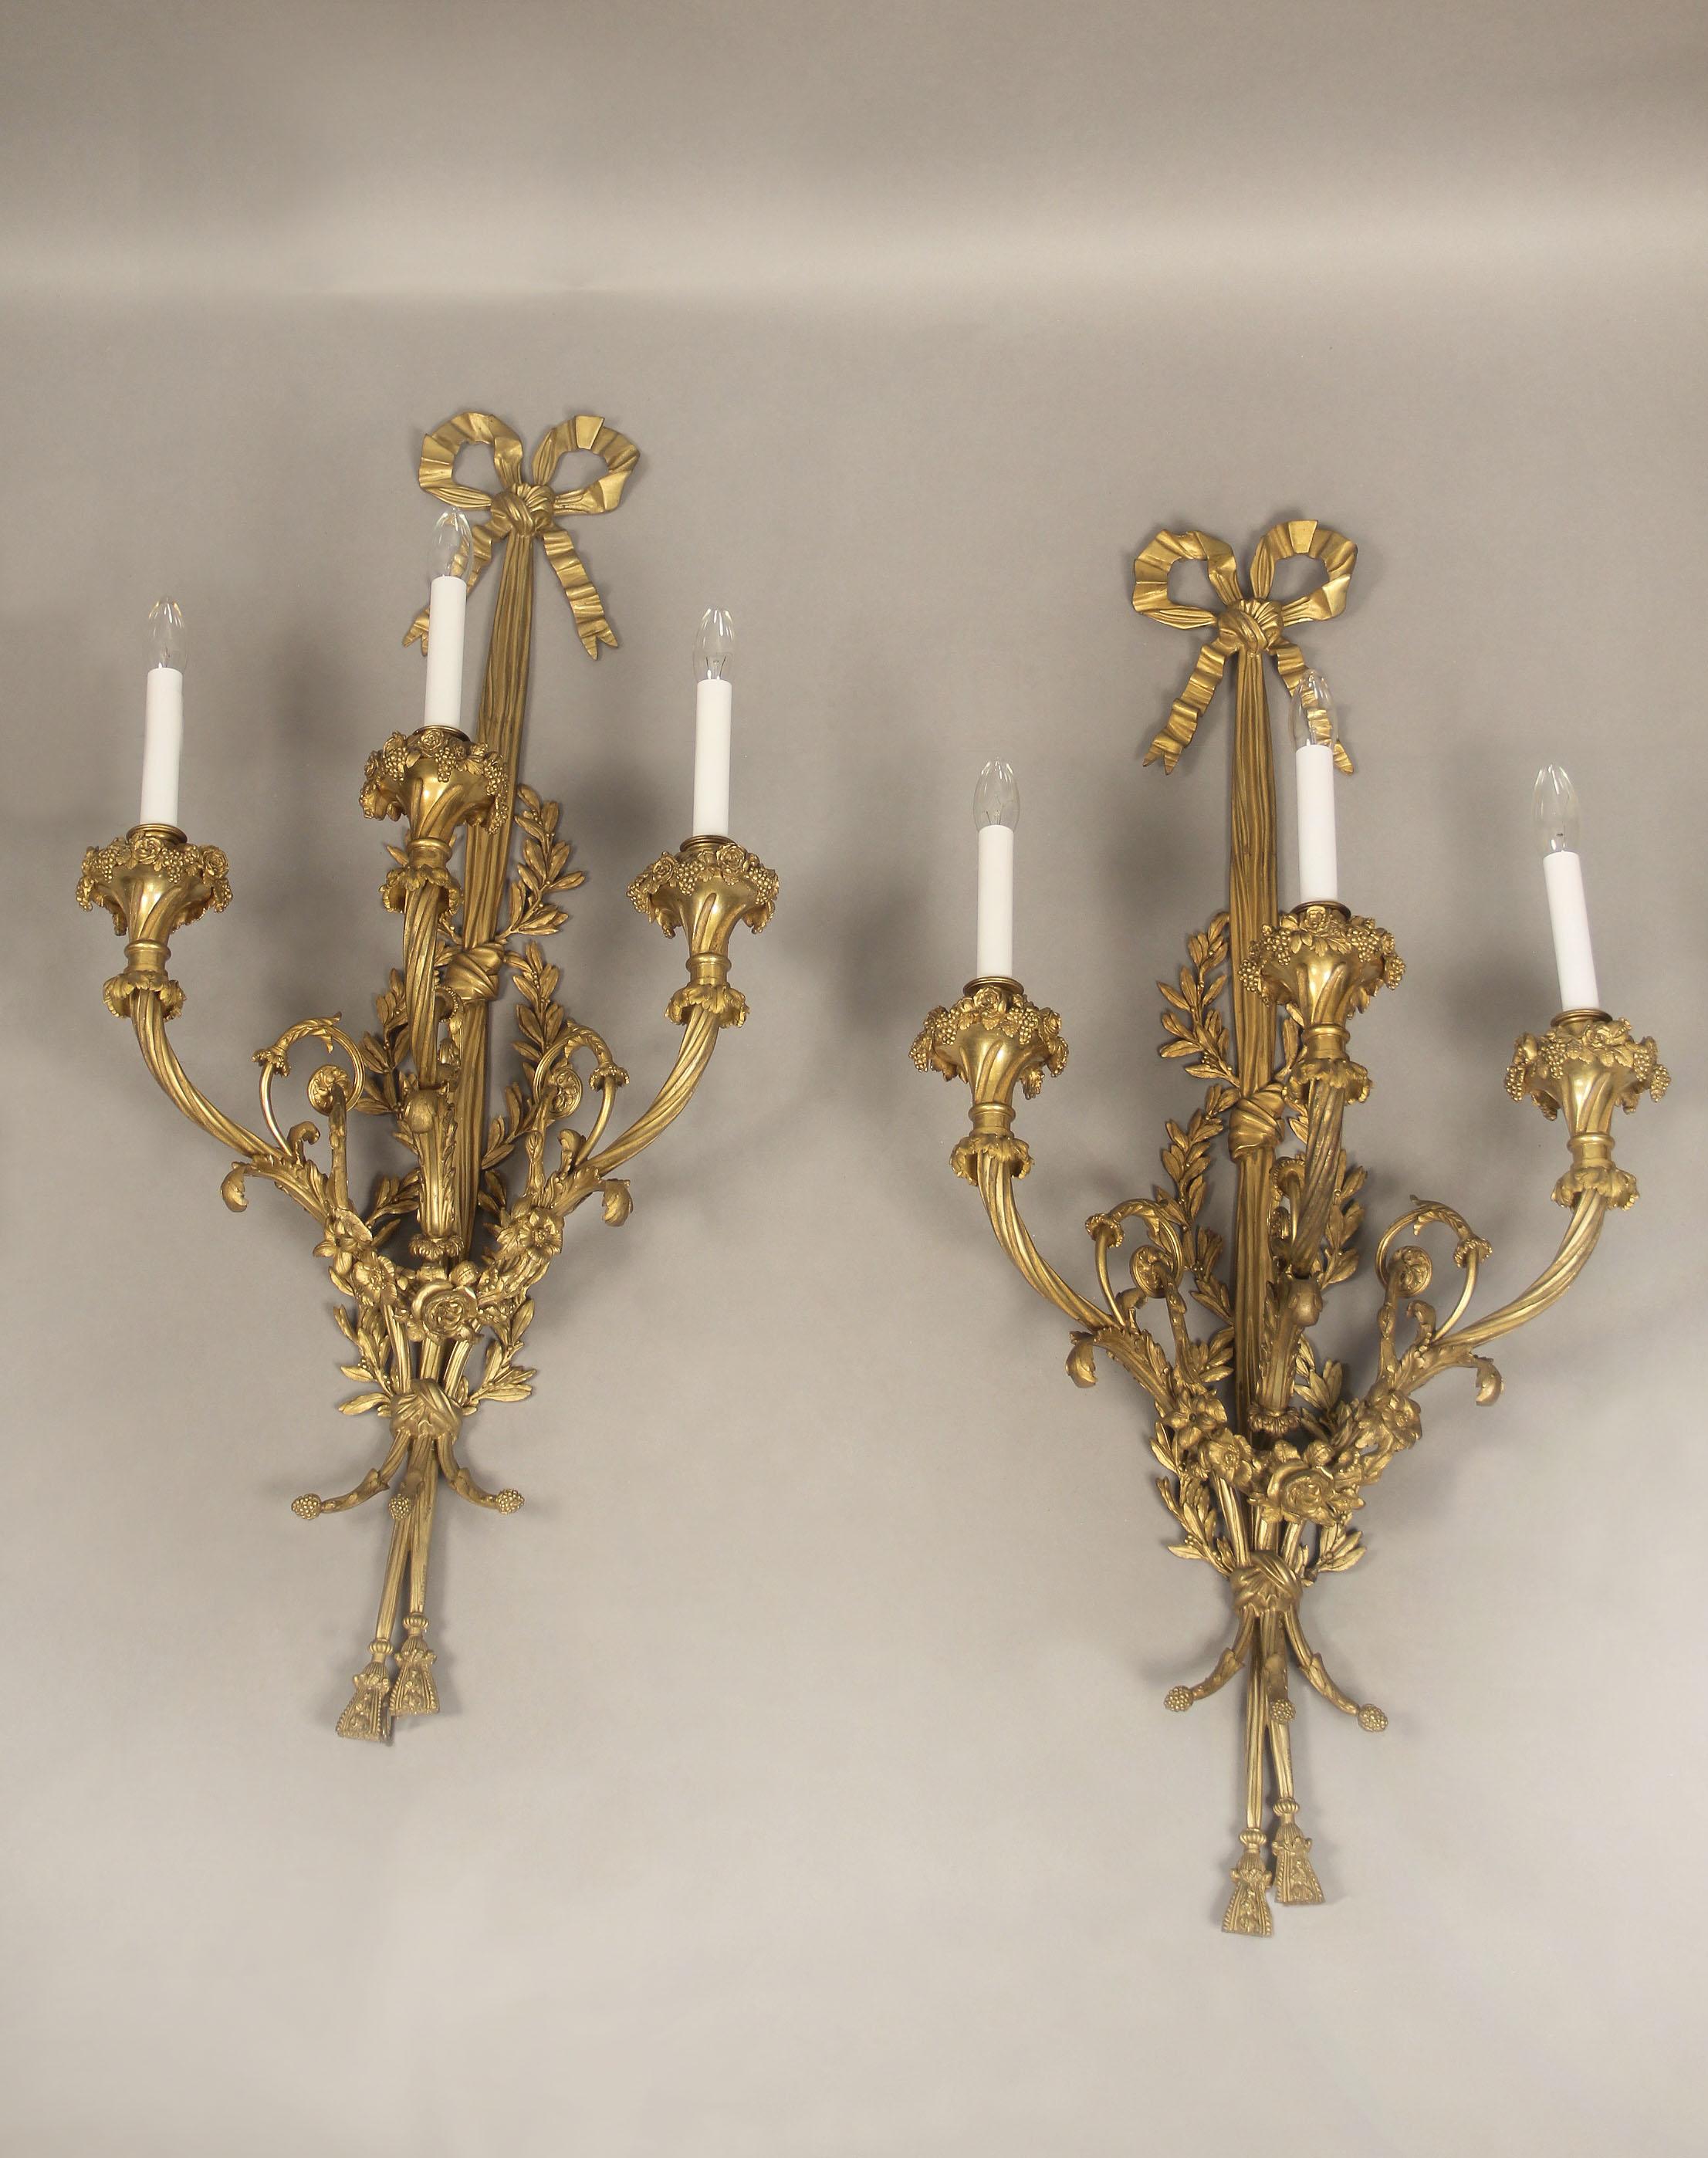 A fantastic quality pair of late 19th century gilt bronze three light sconces.

By Maison Millet

The finely chiseled sconces with spiral arms decorated with leaves and berries, the body centered with swags of roses and flowers, the top with a